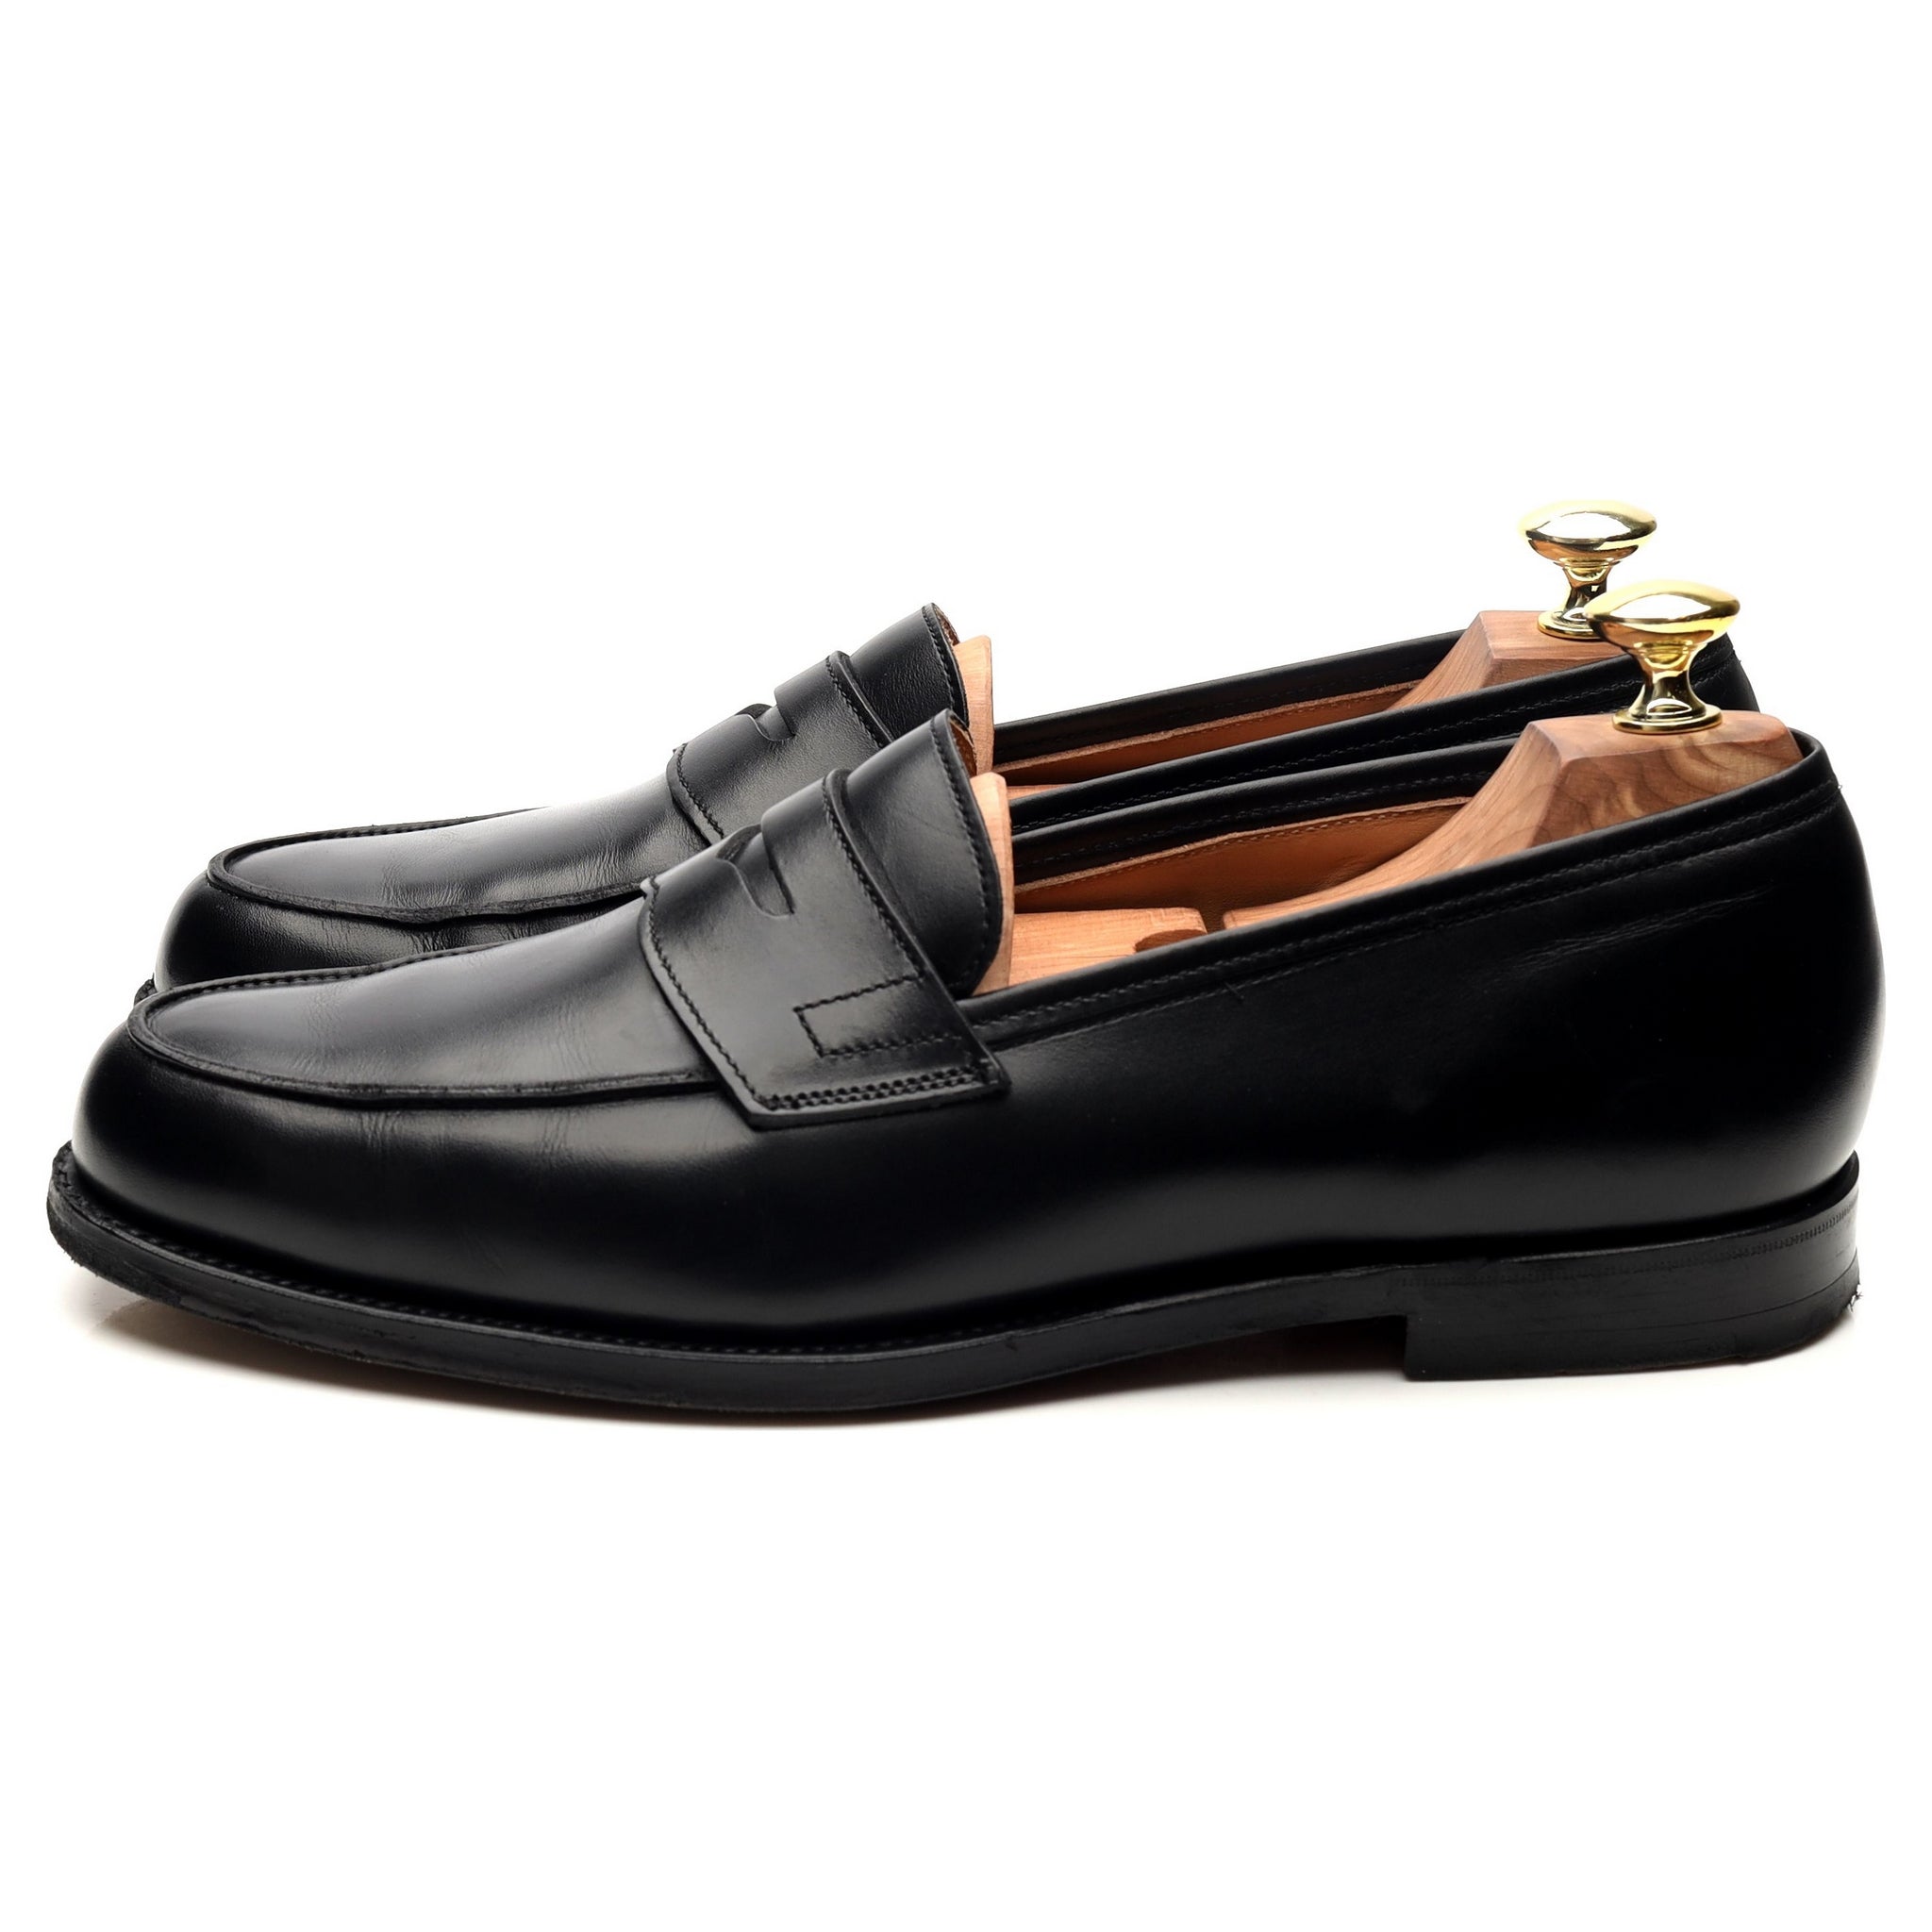 Grantham 2' Black Leather Loafers UK 7 E - Abbot's Shoes